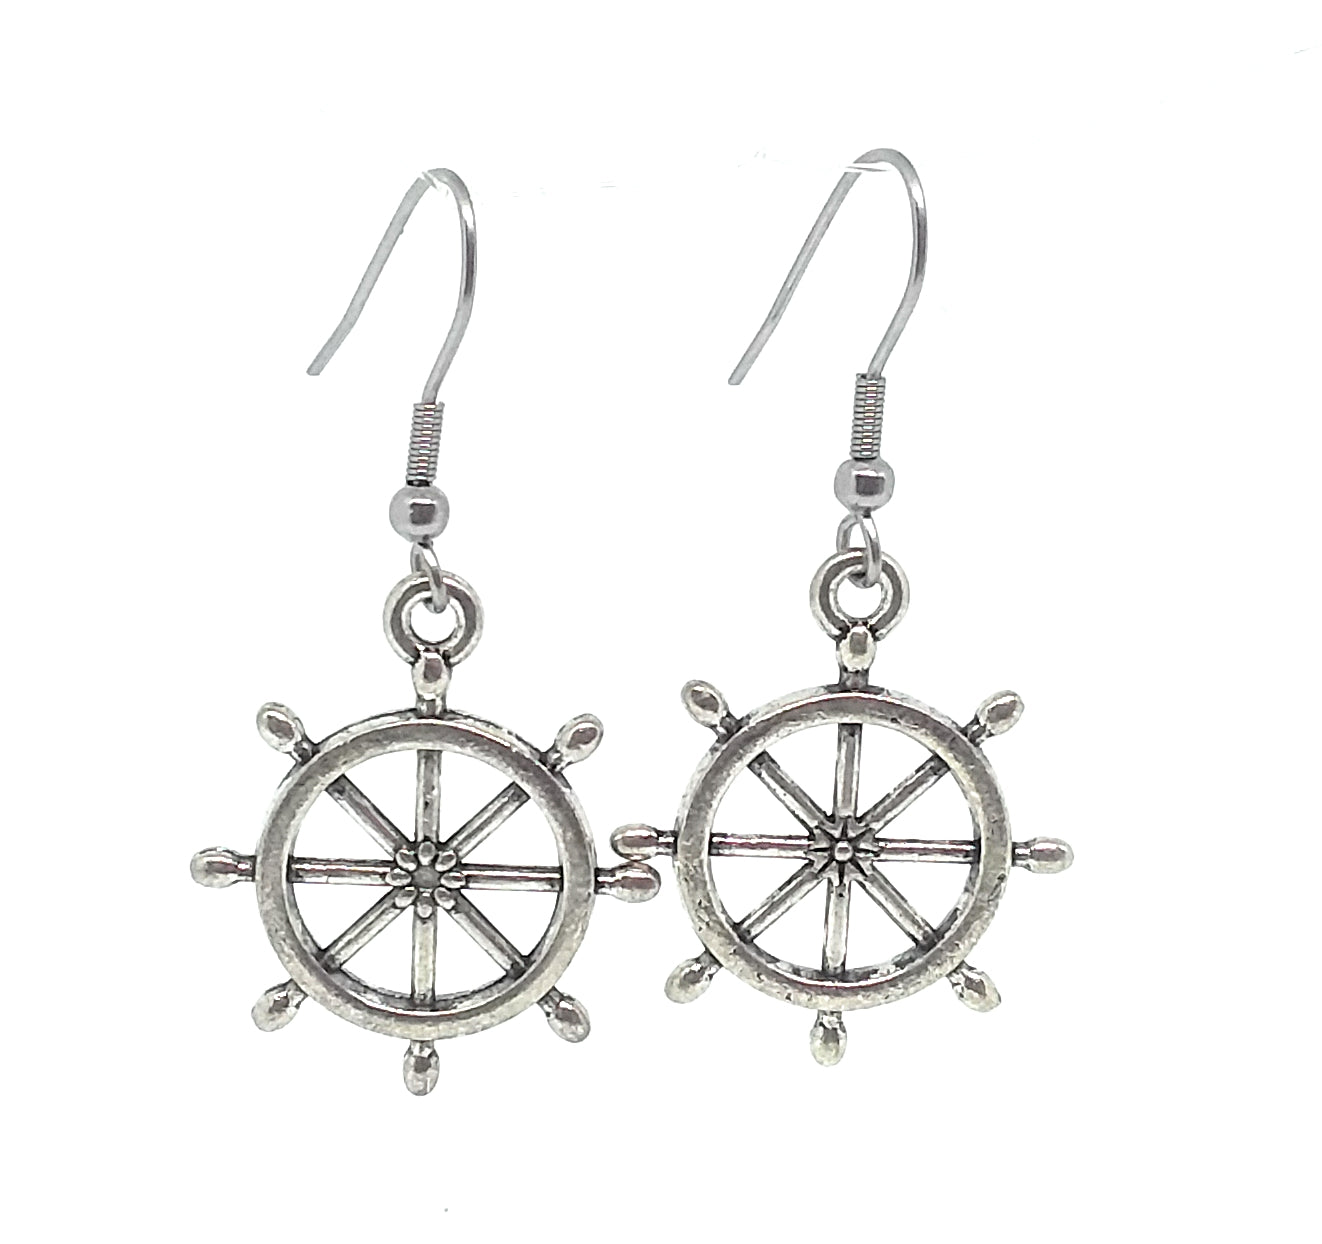 Ship's Wheel Charm Dangle Earrings with Stainless Steel Ear Wires